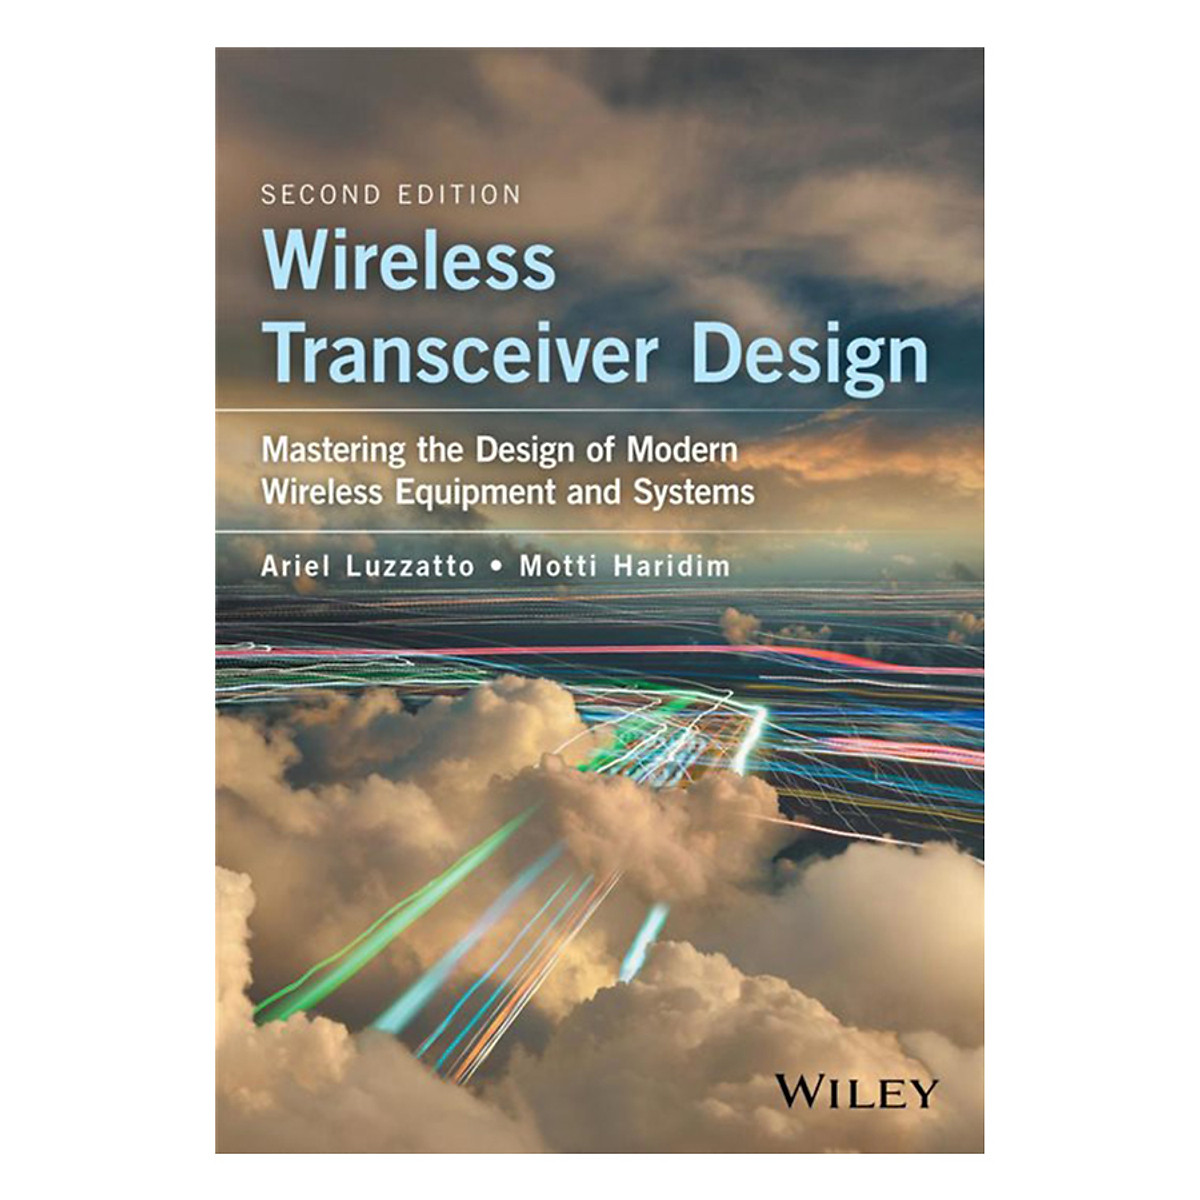 Wireless Transceiver Design - Mastering The Design Of Modern Wireless Equipment And Systems 2nd Edition